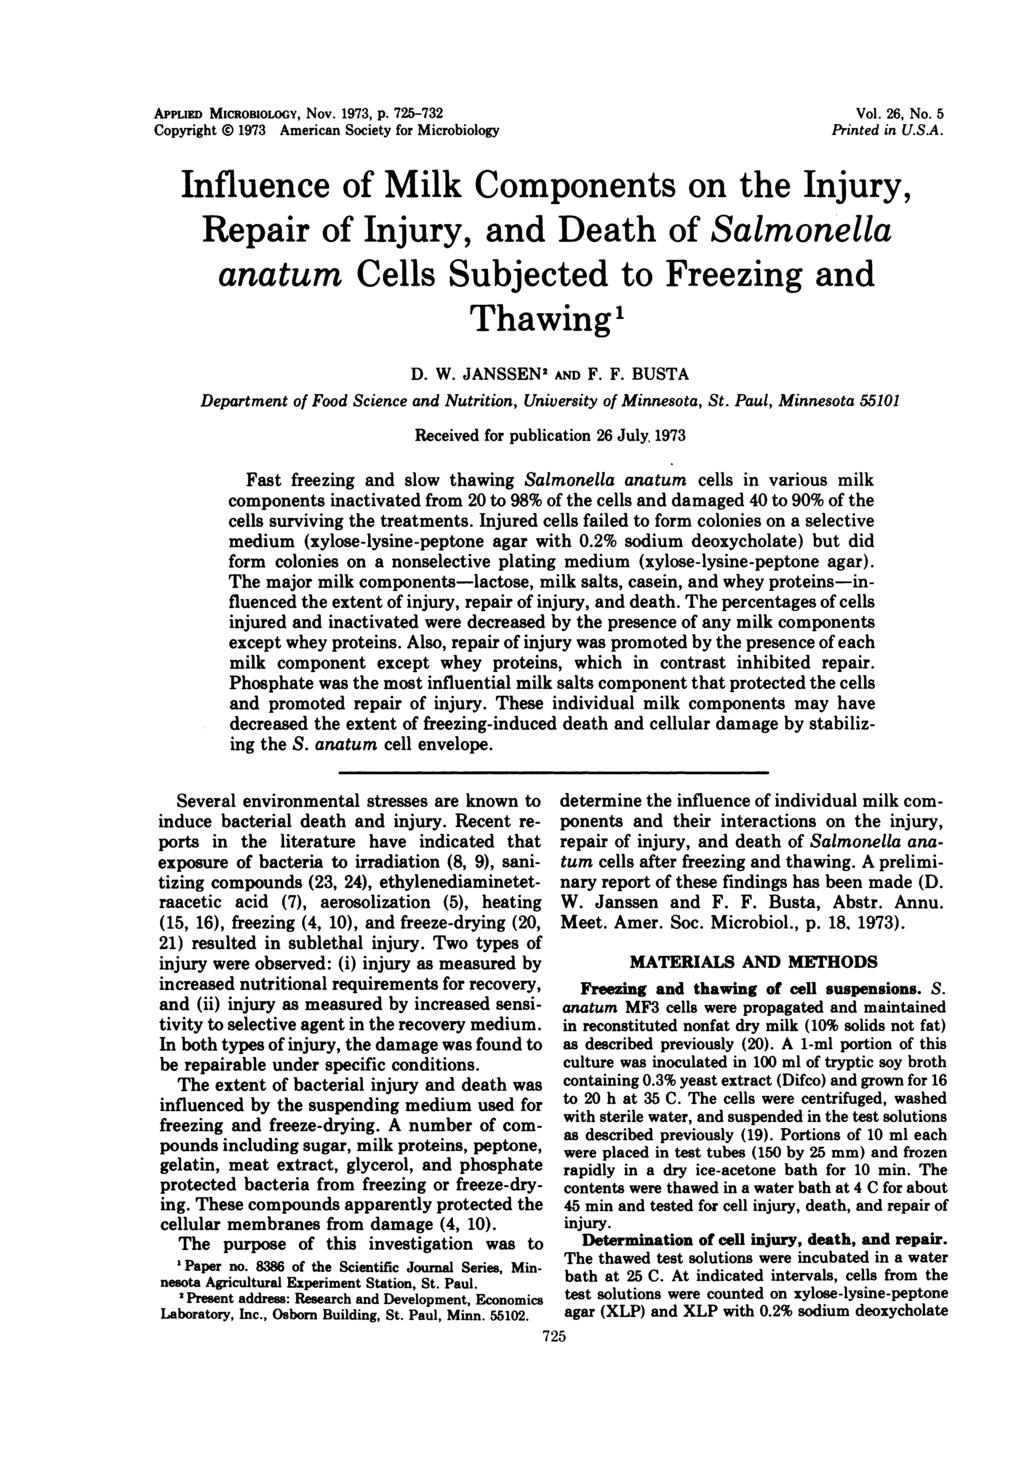 APPLIED MICROBIOLOGY, Nov. 1973, p. 725-732 Copyright 0 1973 American Society for Microbiology Vol. 26, No. 5 Printed in U.S.A. Influence of Milk Components on the Injury, Repair of Injury, and Death of Salmonella anatum Cells Subjected to Freeing and Thawing1 D.